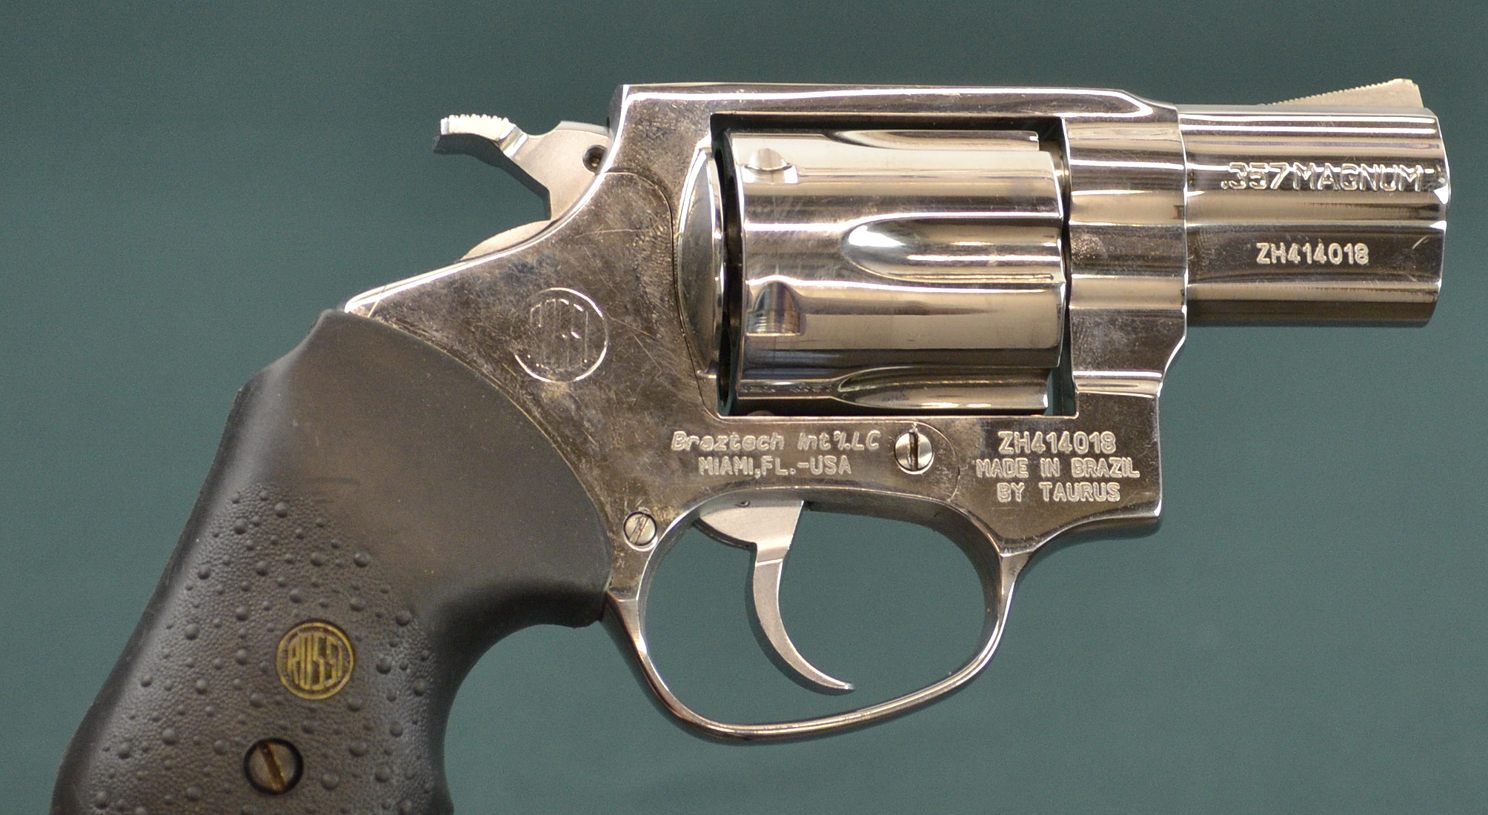 rossi-firearms-model-462-357mag-revolver-for-sale-at-gunauction